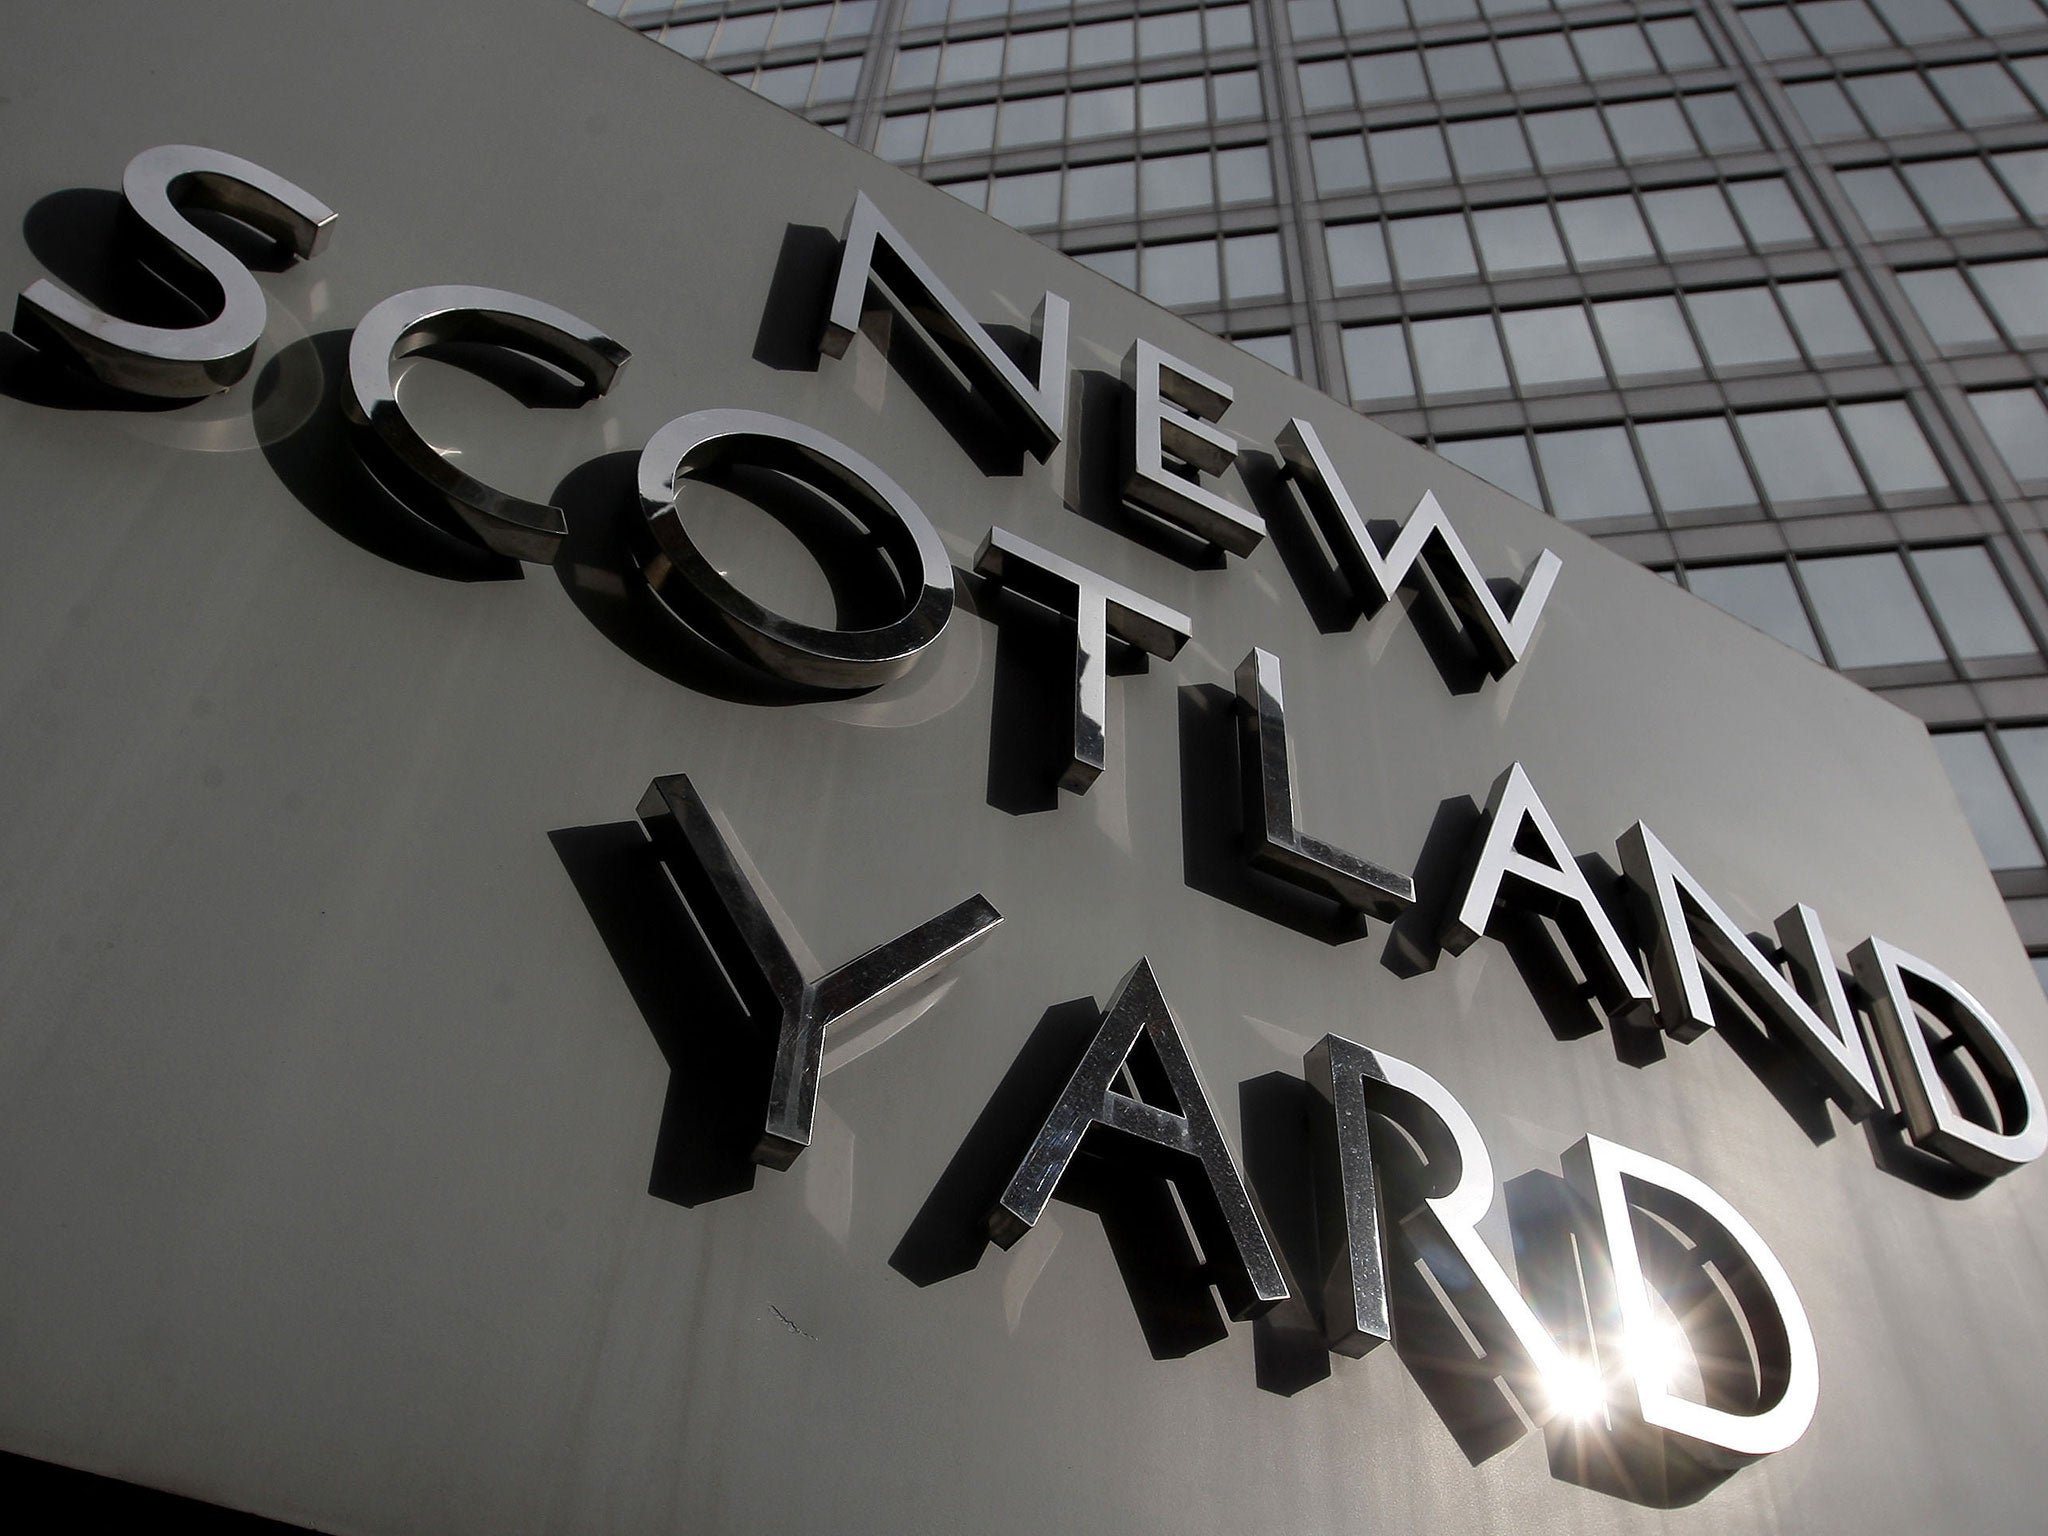 Scotland Yard has confirmed it is investigating four Premier League clubs as part of the child sexual abuse scandal